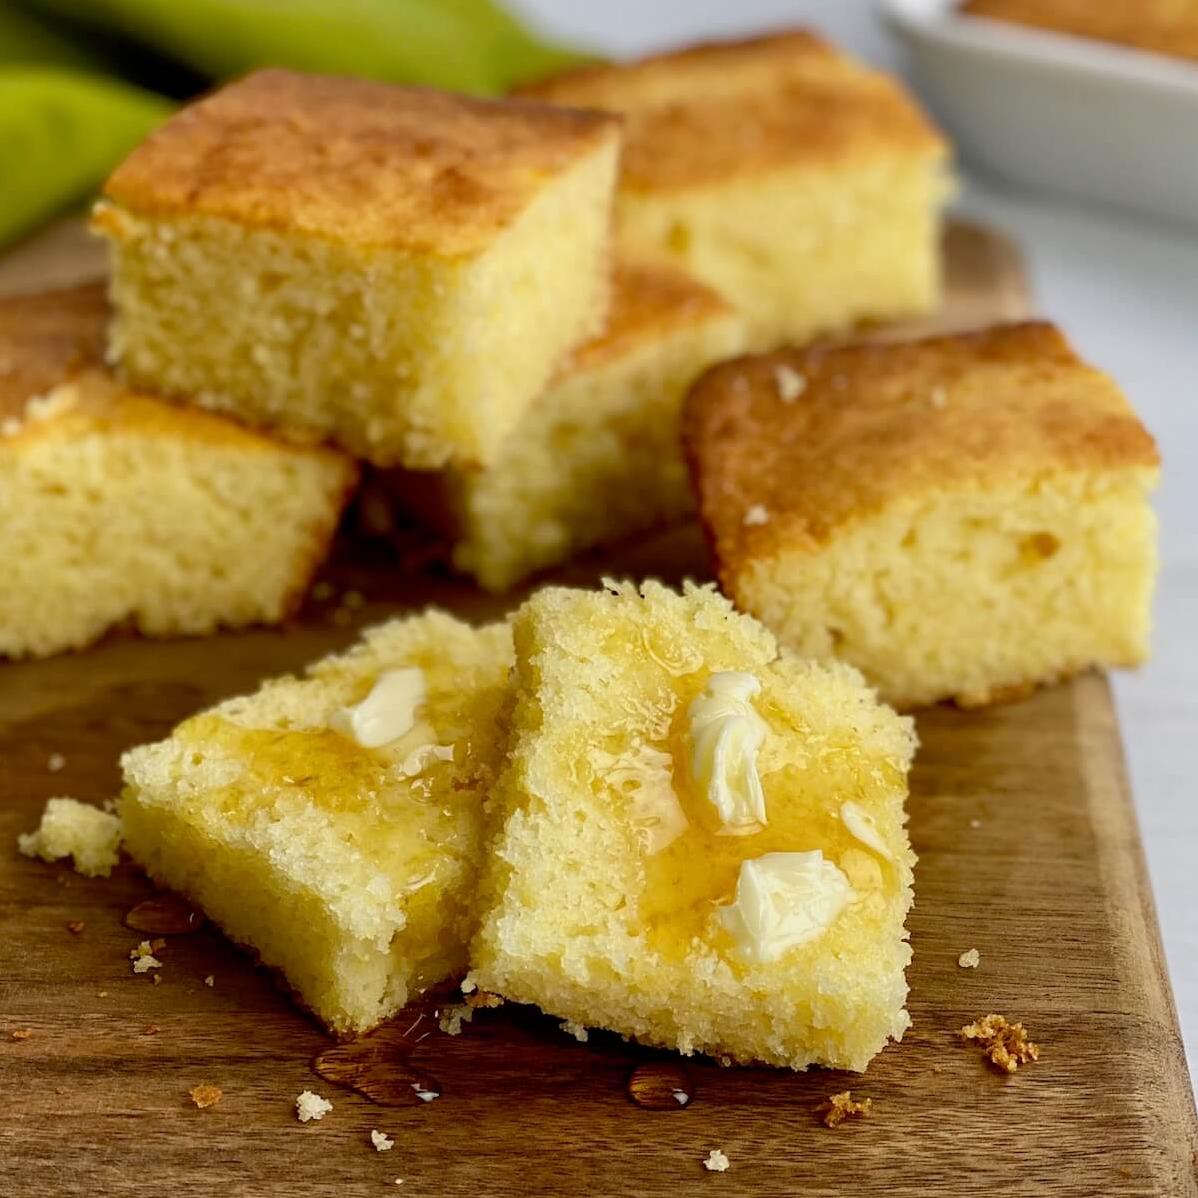  A hearty and wholesome indulgence: Dig into a warm and crumbly piece of gluten-free southern cornbread